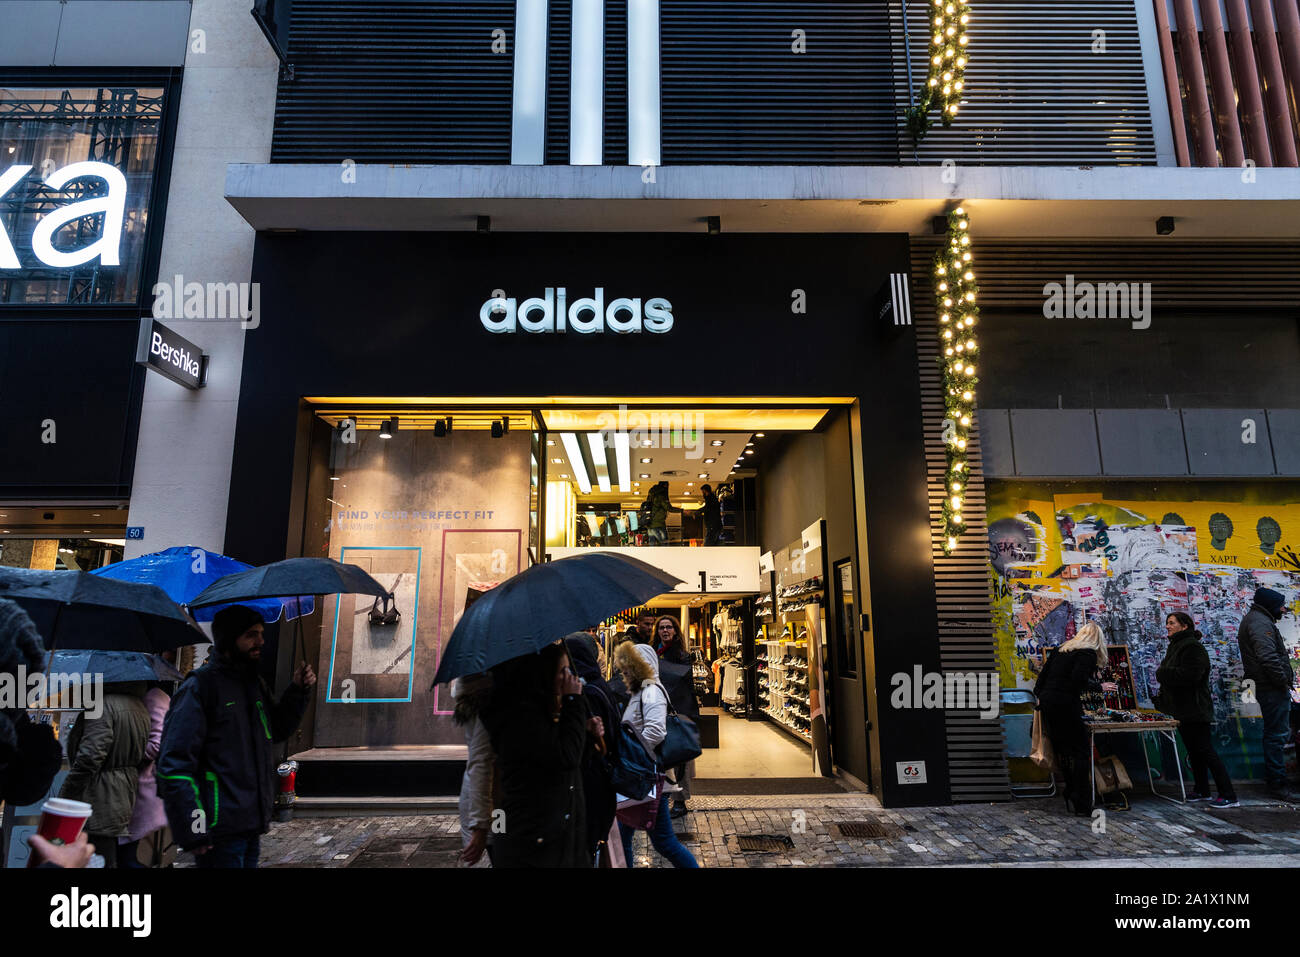 Athens, Greece - January 4, 2019: Display of a Adidas store at night with  people around in Athens, Greece Stock Photo - Alamy